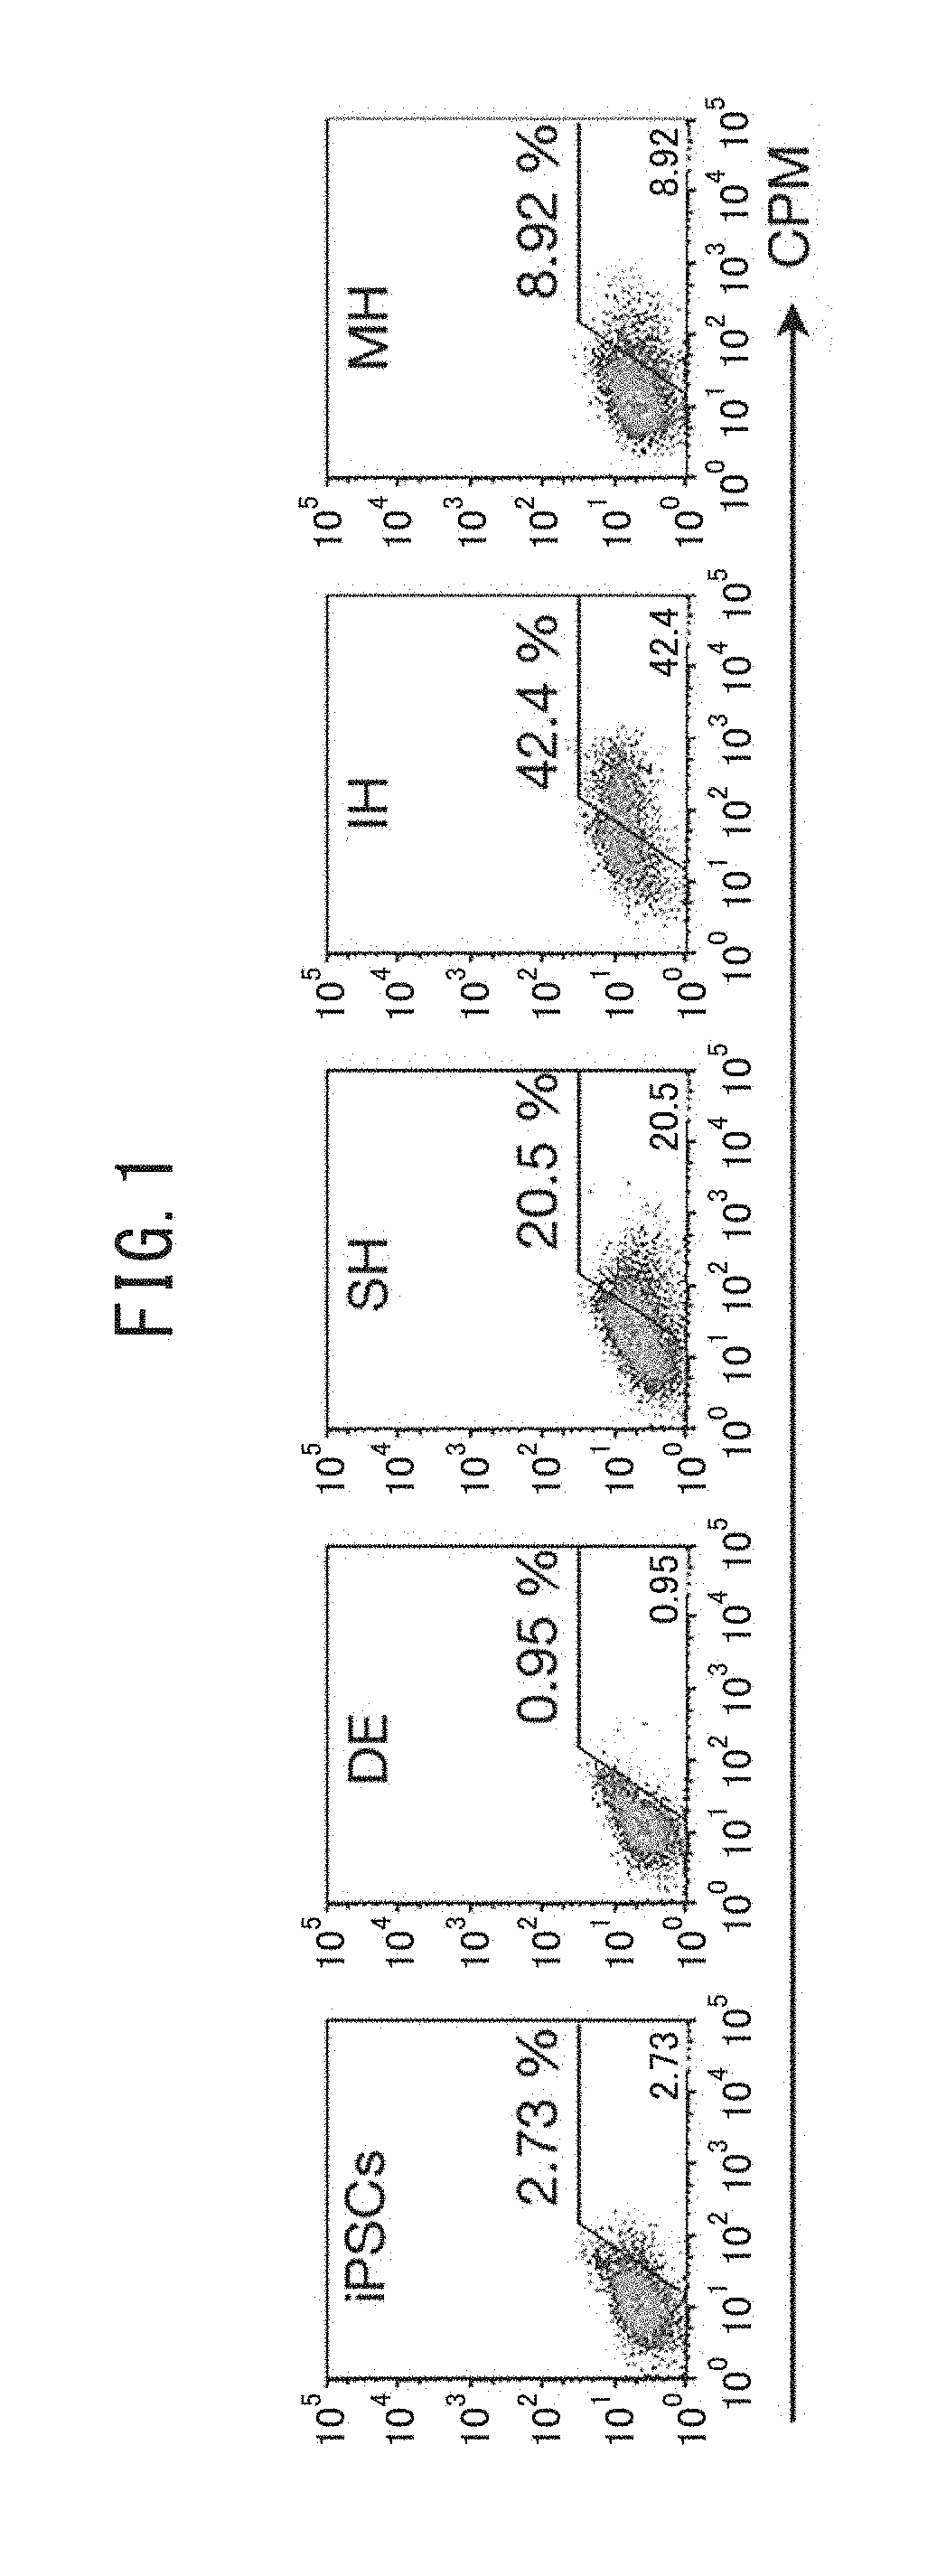 Hepatocytes and hepatic non-parenchymal cells, and methods for preparation thereof